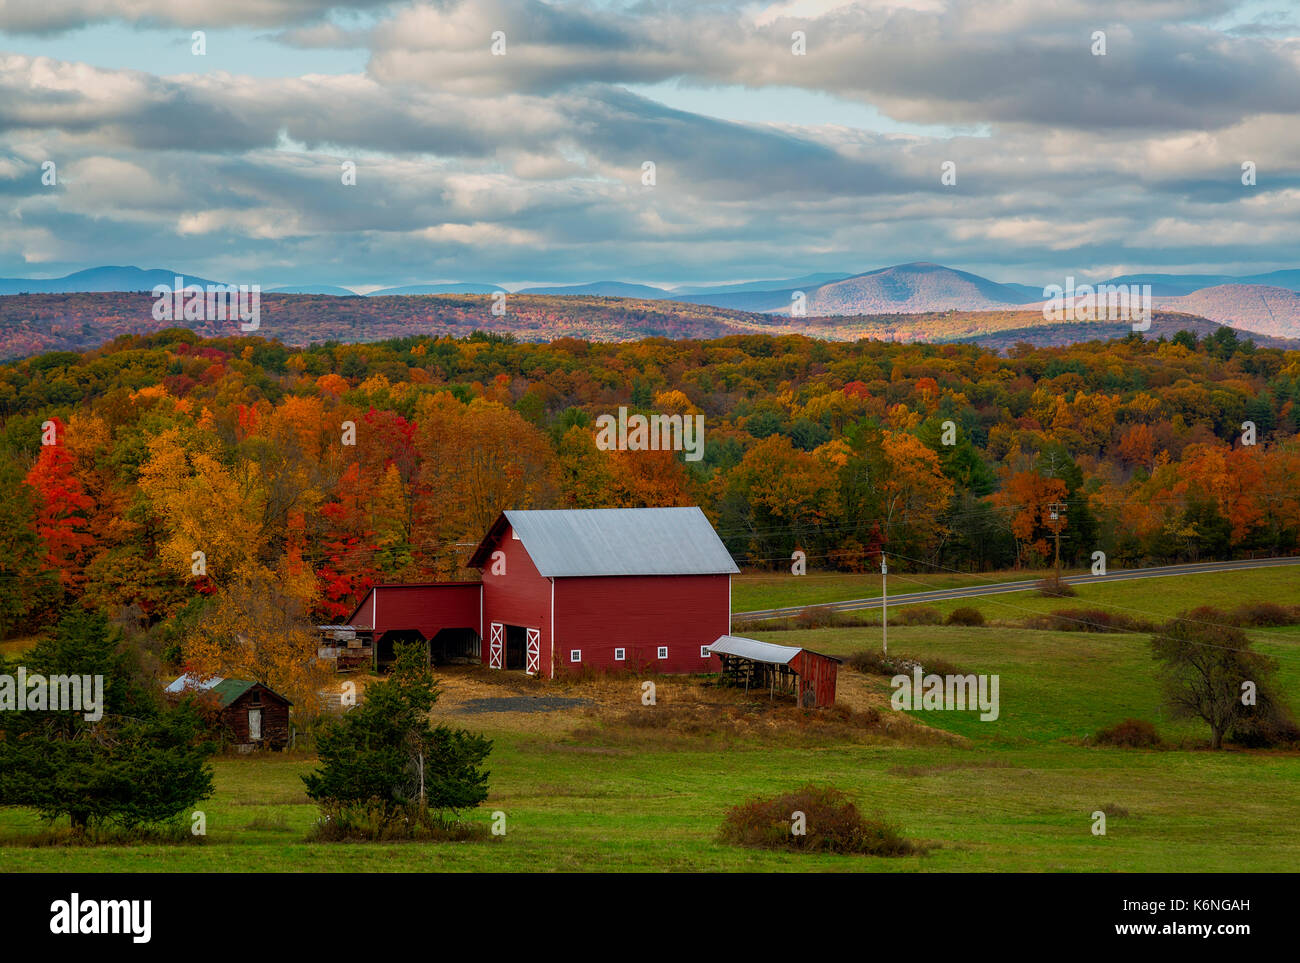 Hudson Valley NY Fall Colors - Red Barn and farmhouse with the warm and bright colors of peak fall foliage as a backdrop. The Shawangunk Ridge, also known as the Shawangunk Mountains or The Gunks, is a ridge of bedrock in Ulster County, Sullivan County and Orange County in the state of New York and can also be seen in the background. Stock Photo